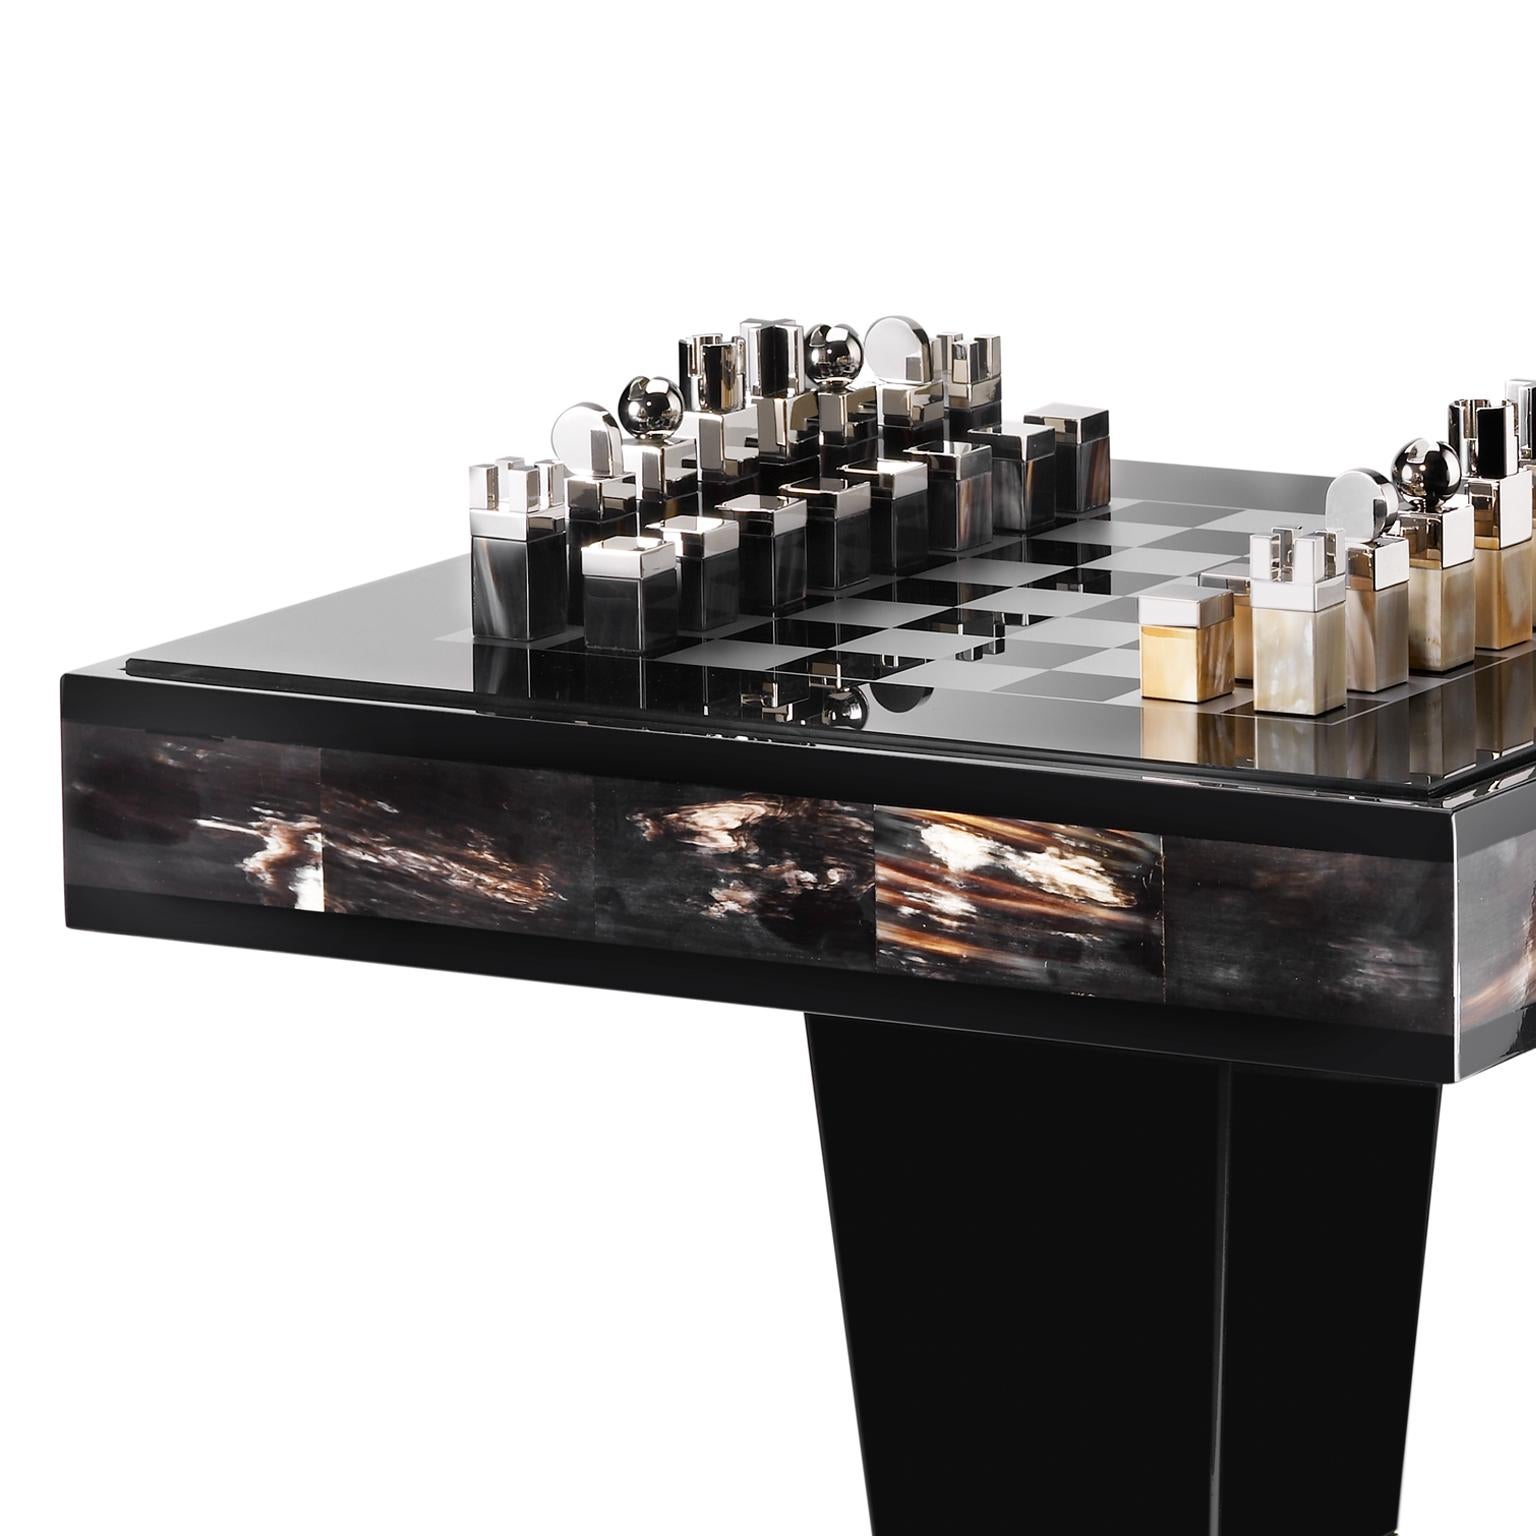 An evident example of superior craftsmanship, the Alfio chess table is destined to become a family heirloom. Boasting an elegant top in tempered smoked glass with silkscreened silver chessboard, it offers a unique playing surface sitting on an